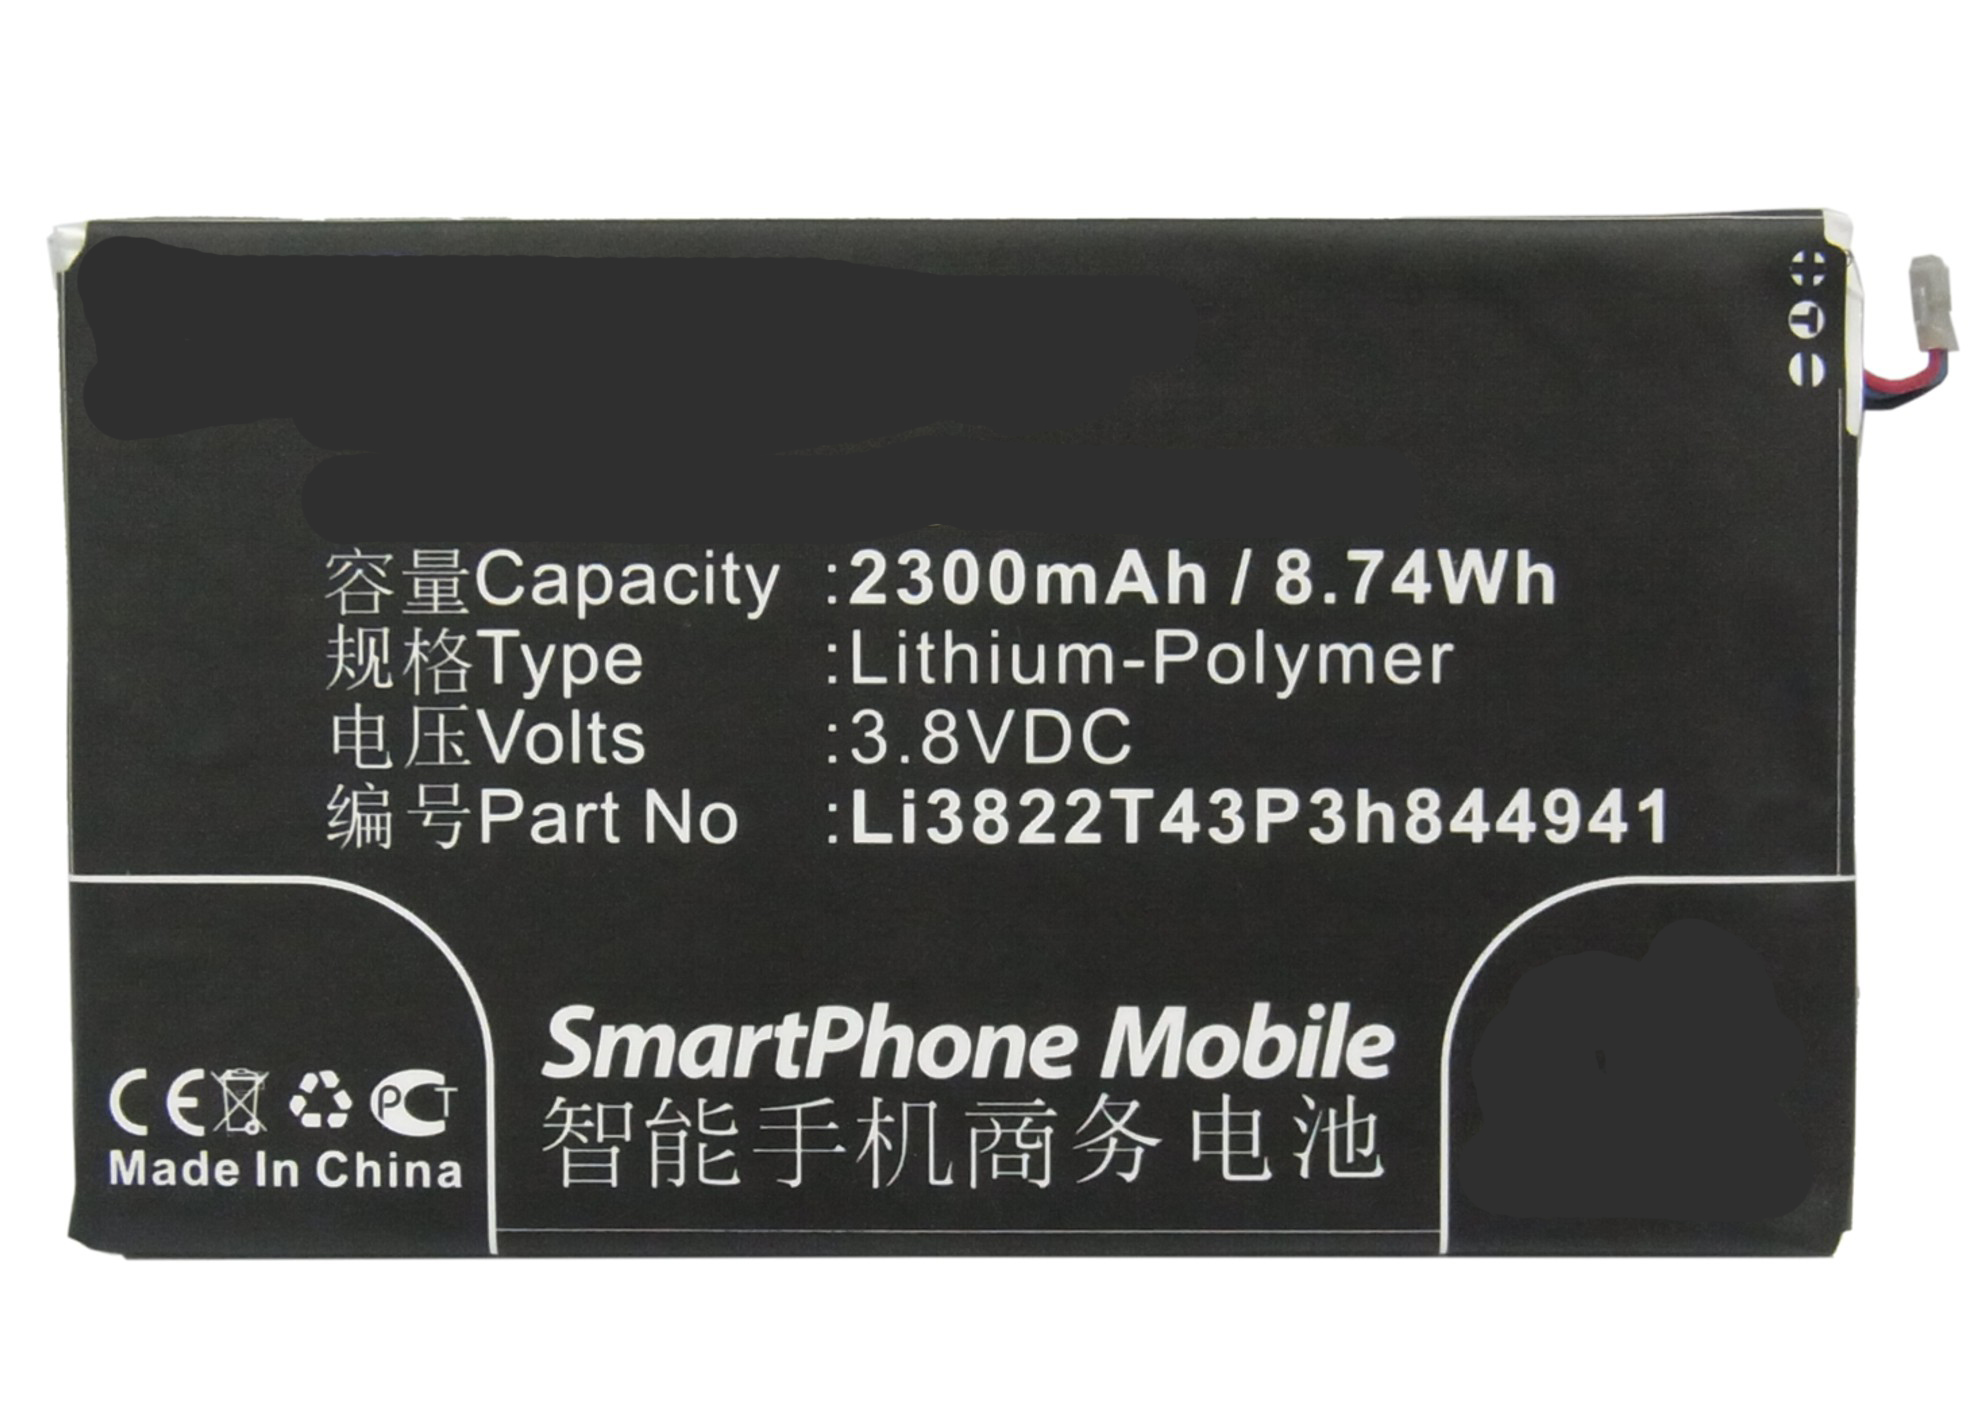 Synergy Digital Cell Phone Battery, Compatiable with ZTE Li3822T43p3h844941 Cell Phone Battery (3.8V, Li-Pol, 2300mAh)